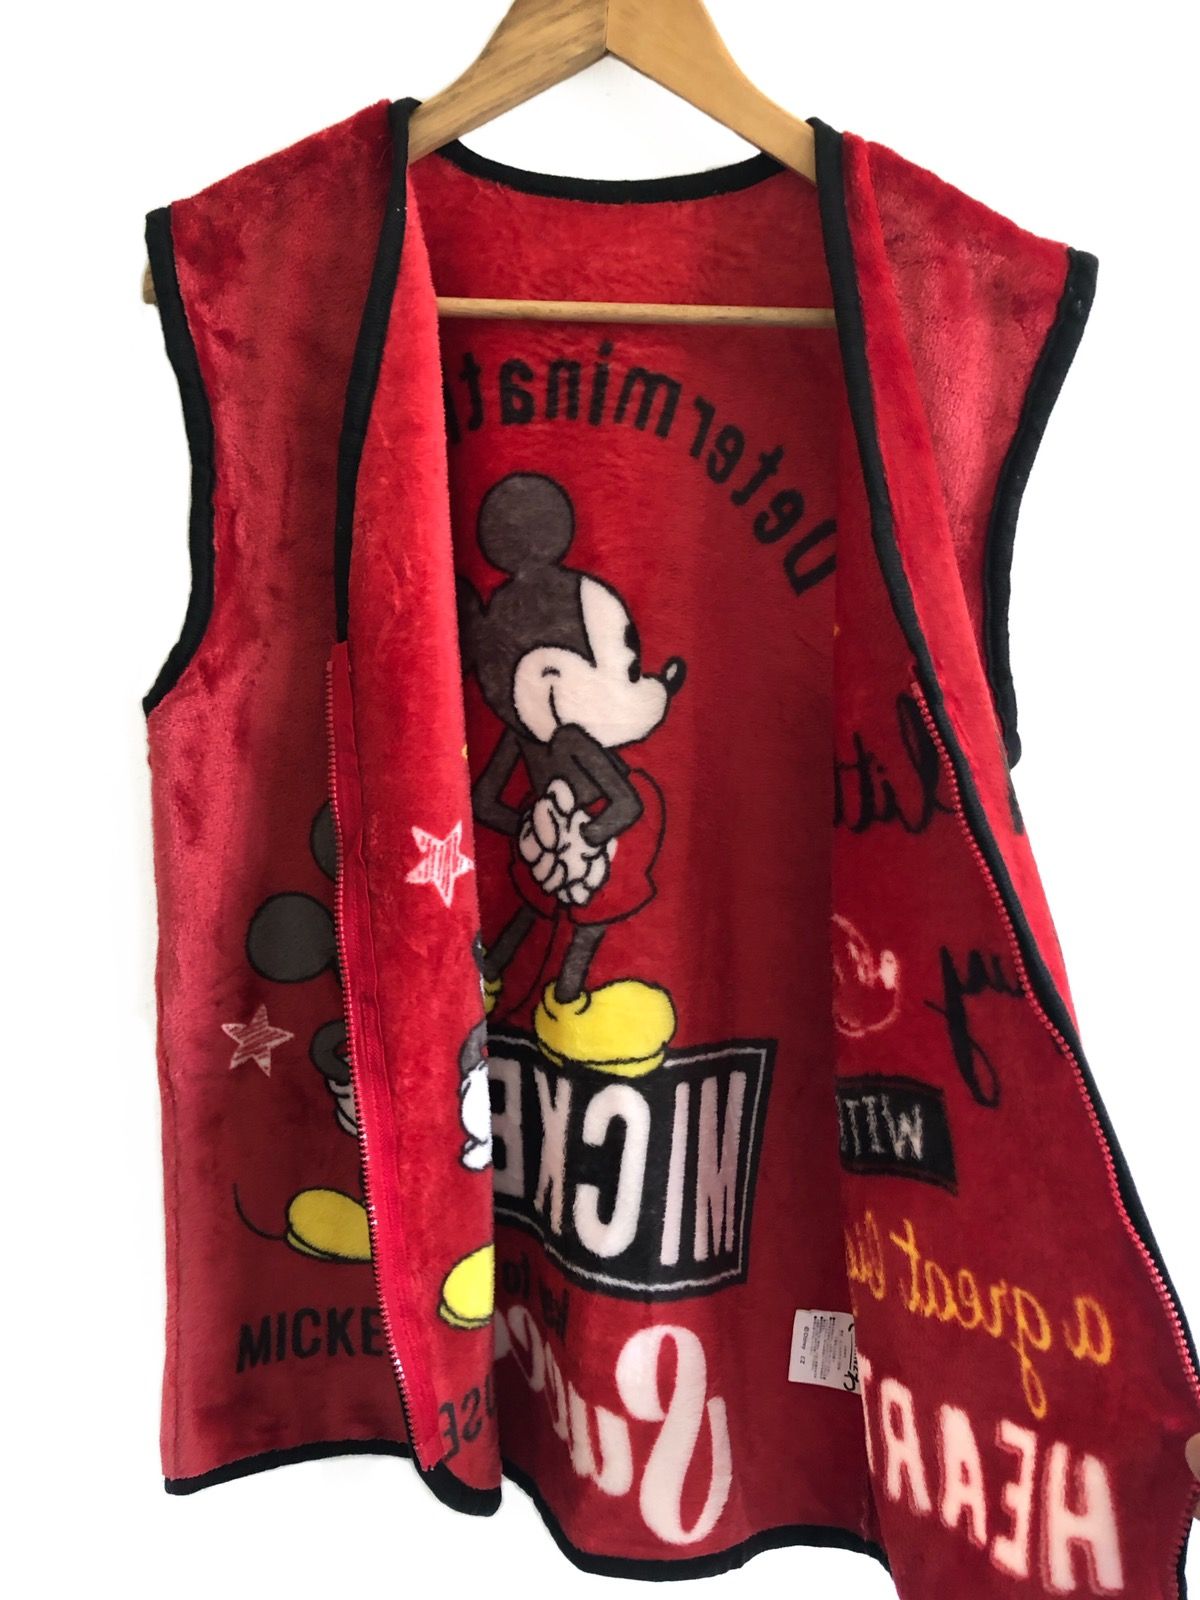 Vintage 80s Mickey Mouse cardigan vests - 5